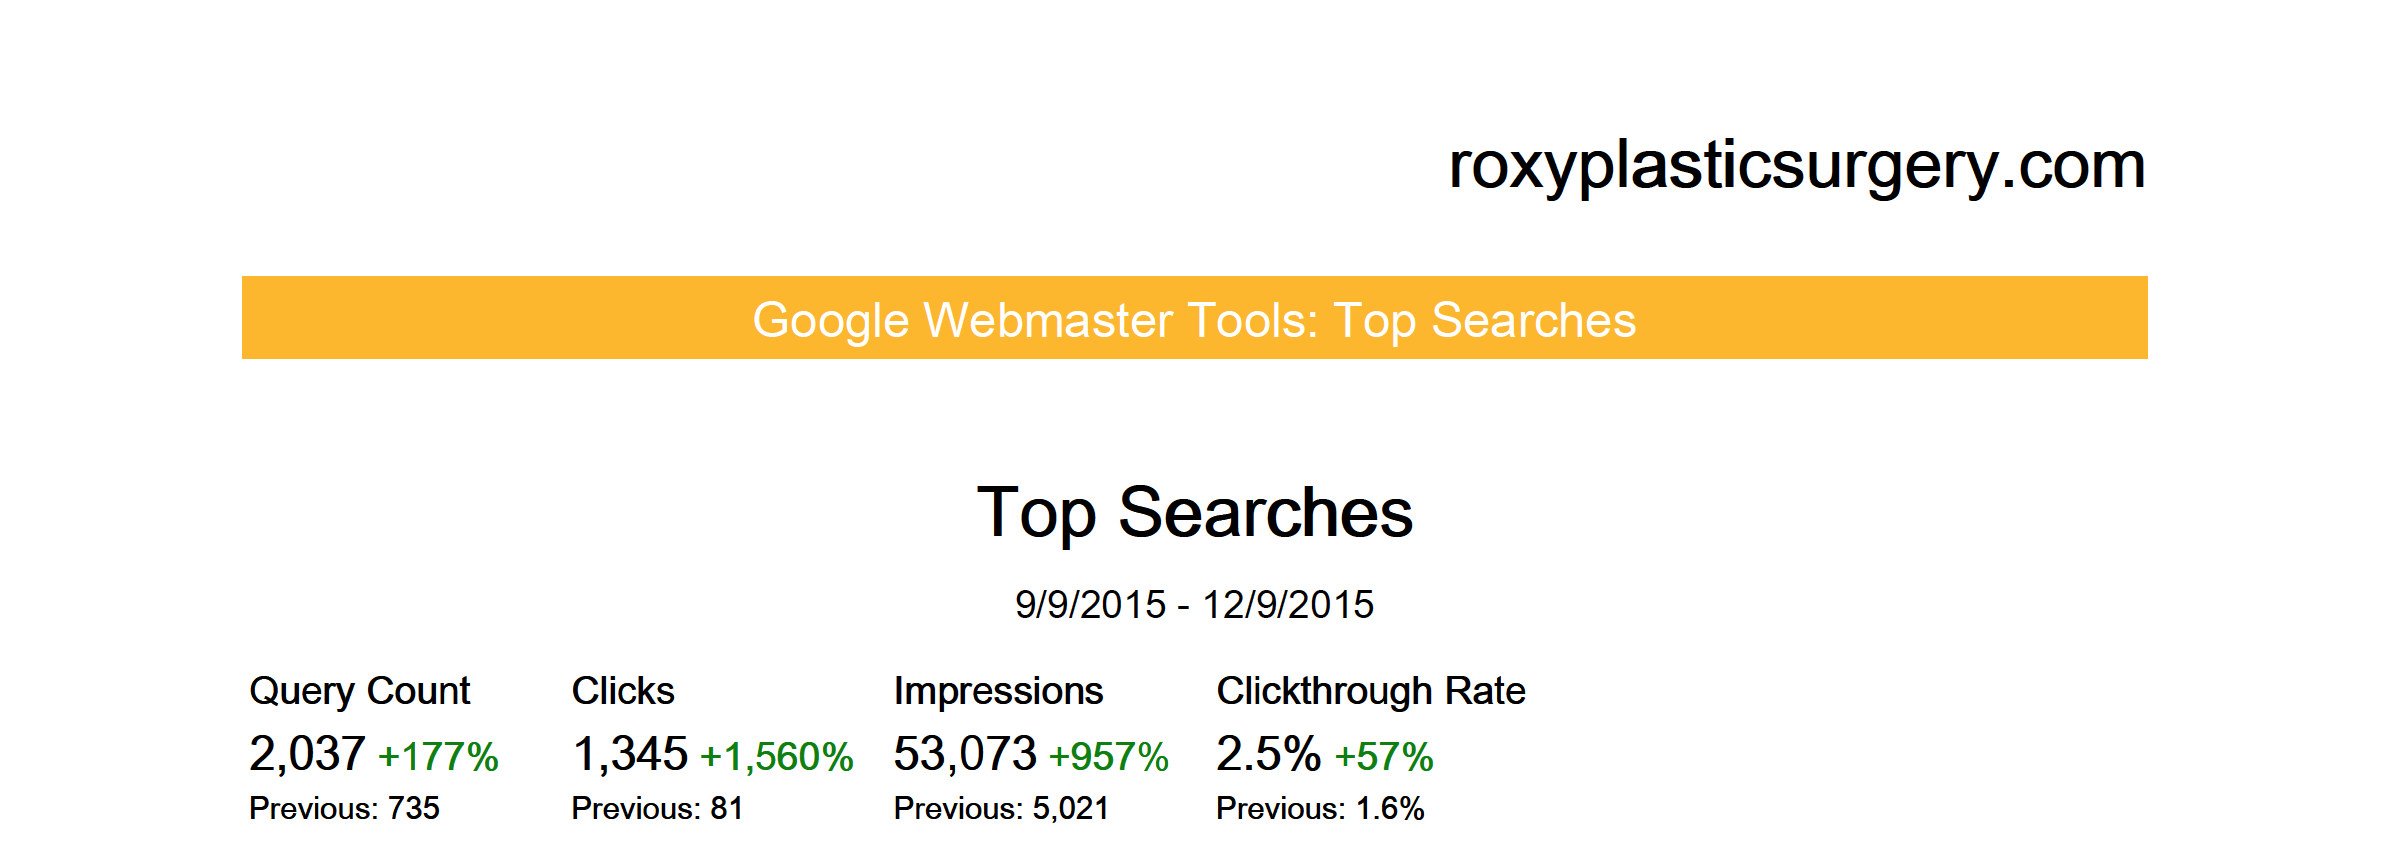 roxy plastic surgery top searches 3 month results